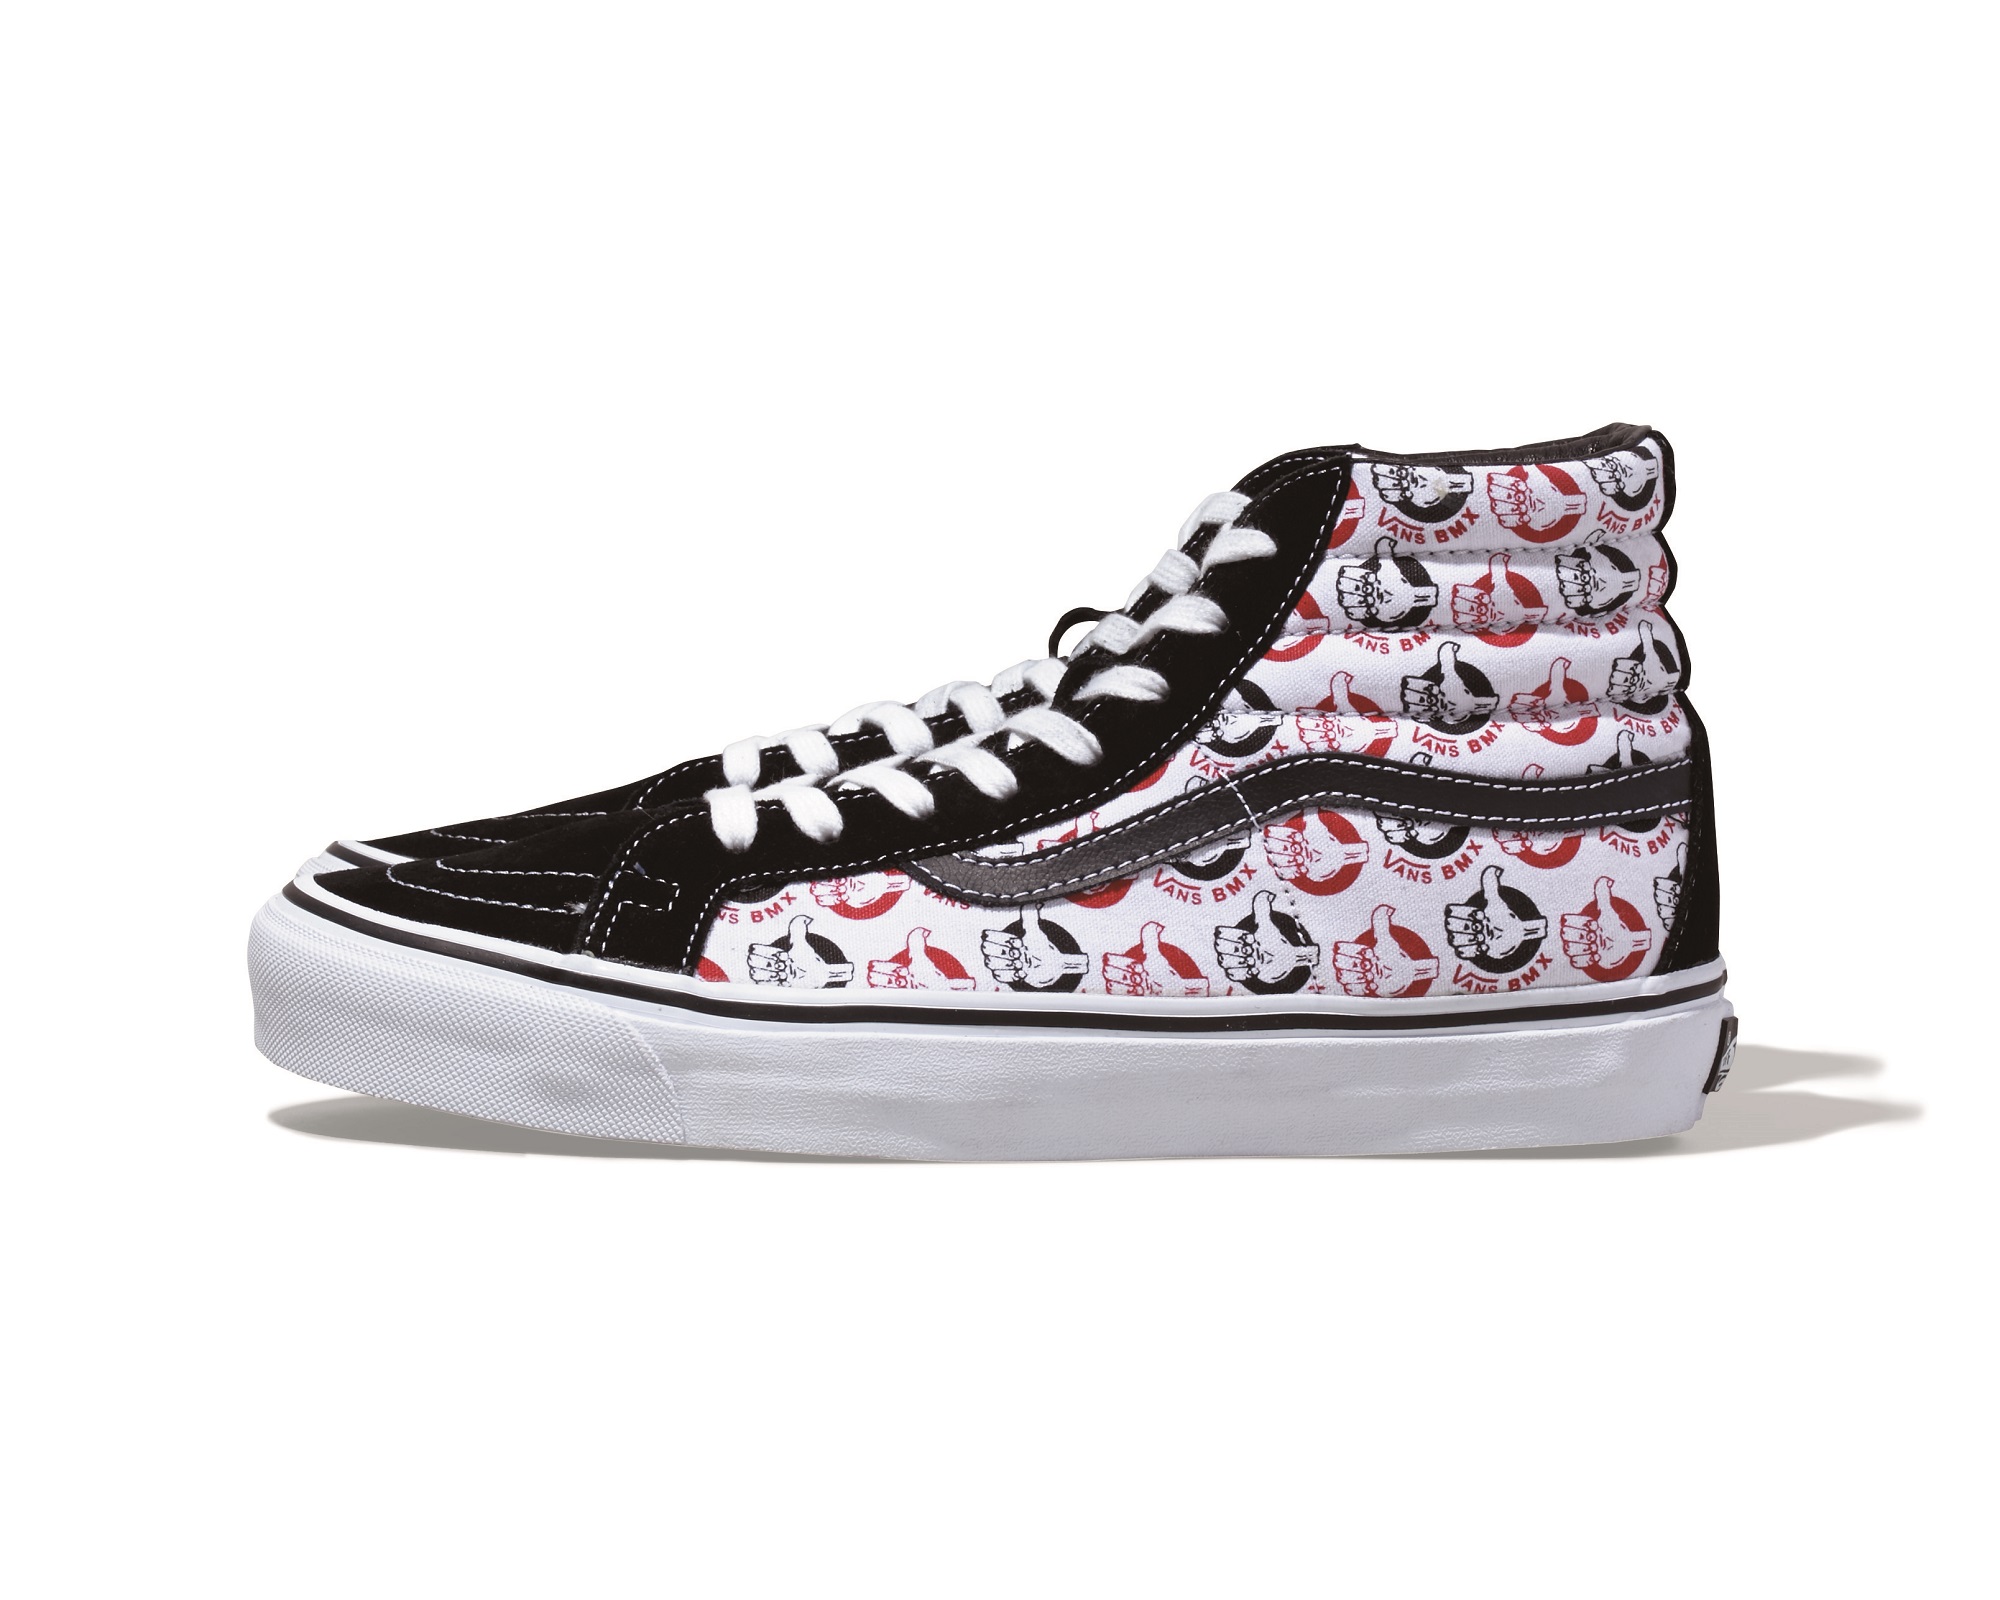 The NEIGHBORHOOD x VAULT by VANS Collection Drops This Weekend In ...